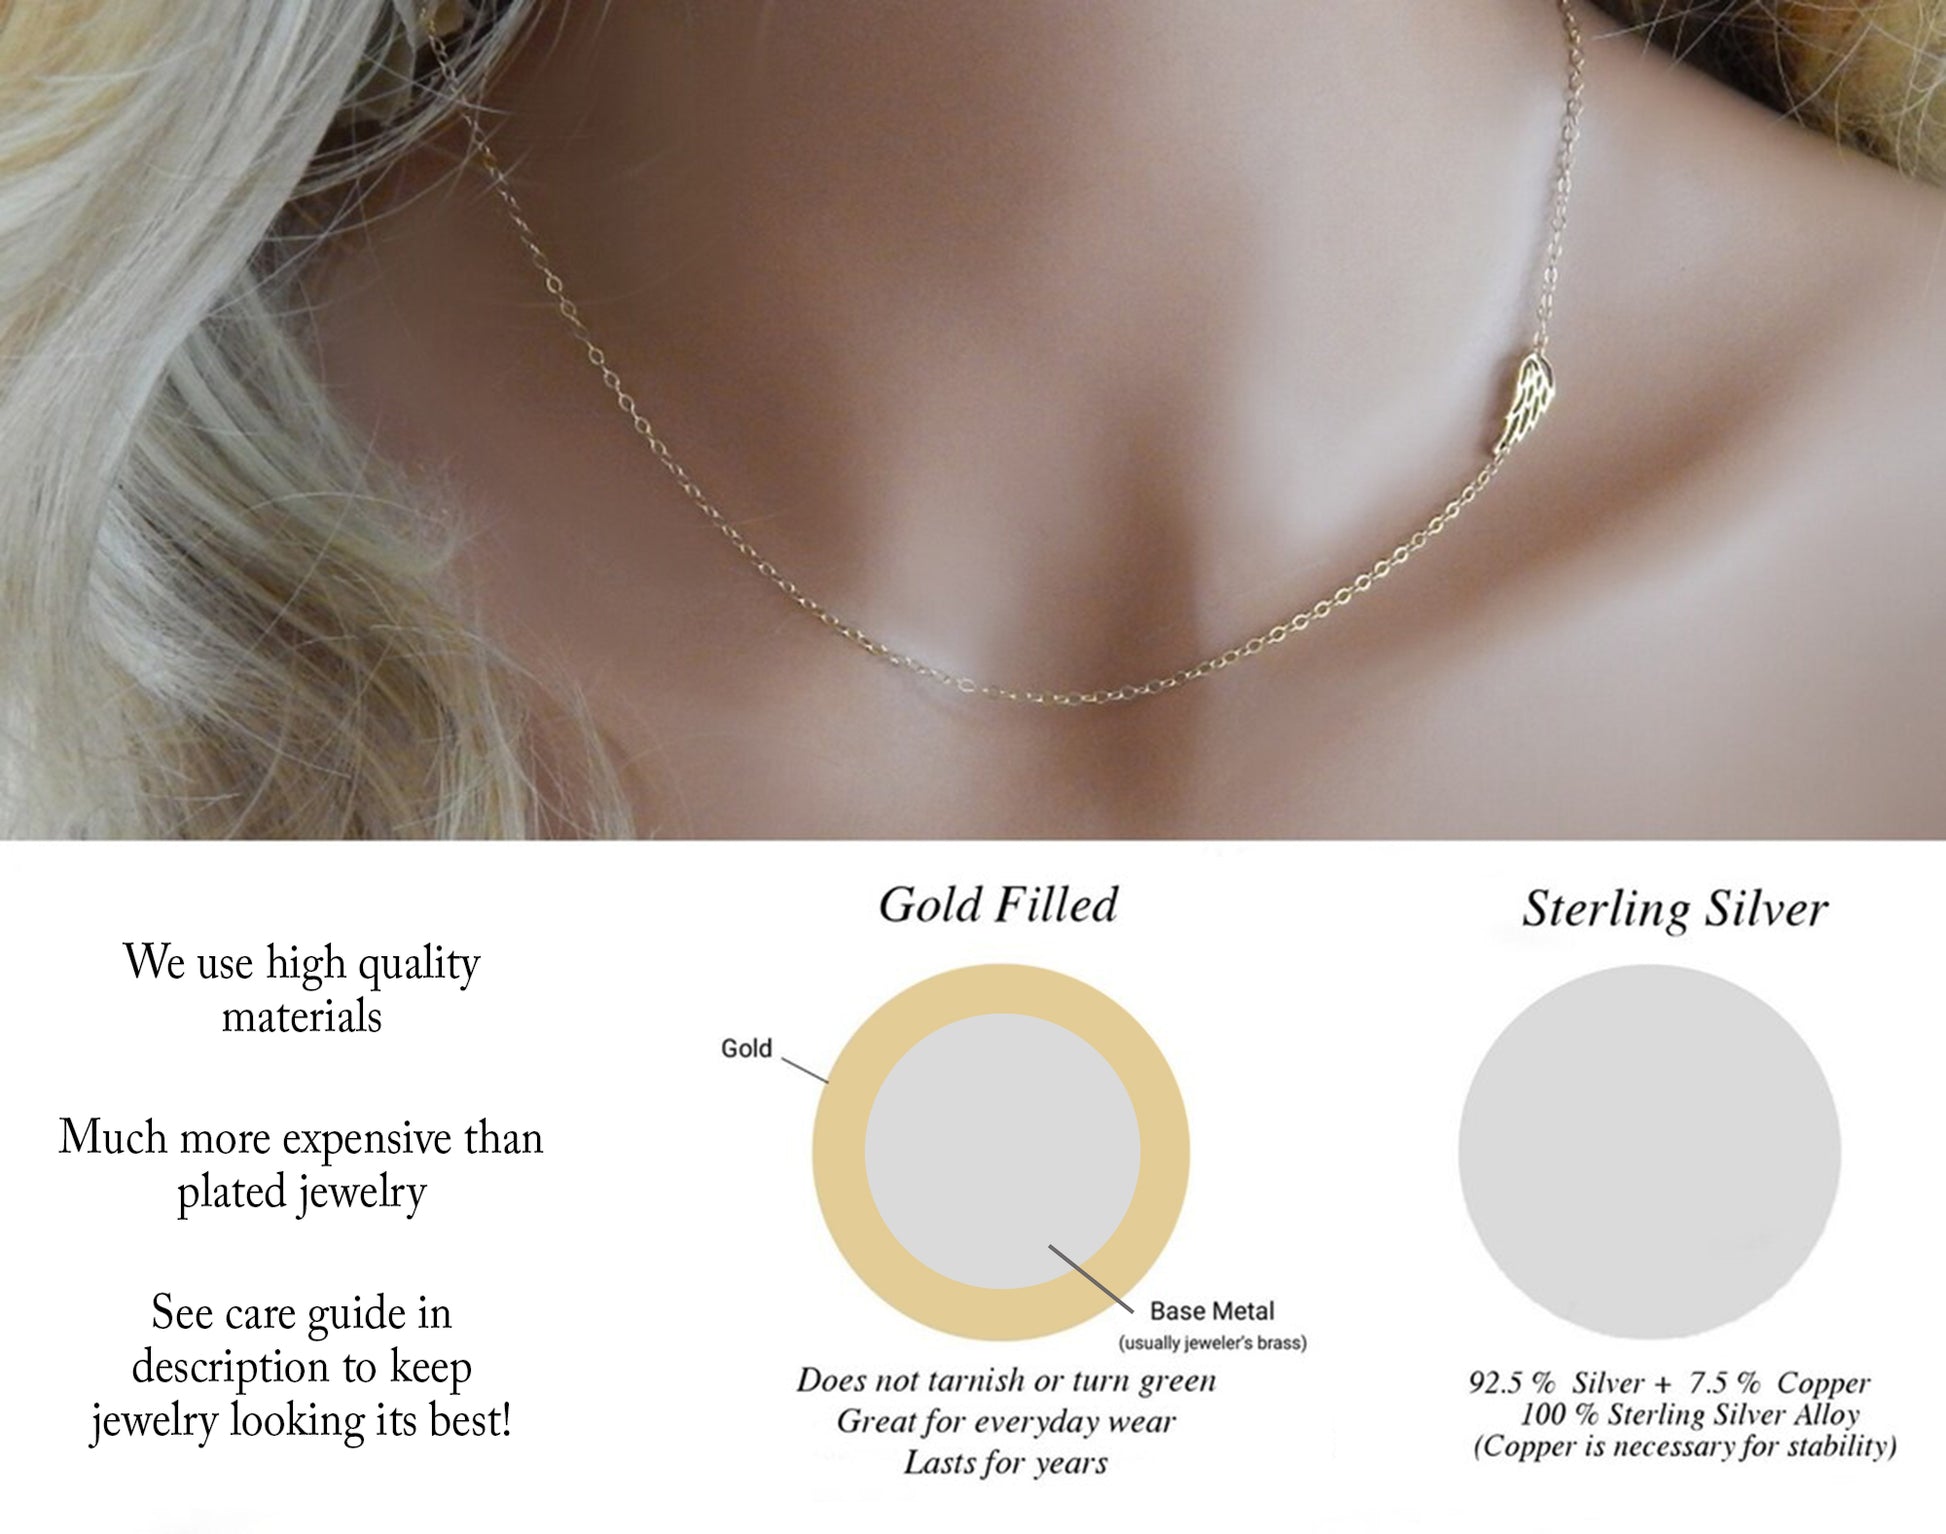 Gold necklace with off center wing charm is worn on a model's neck with a diagram and description underneath about the quality of metals offered by Gilded Sapphire custom jewelry.